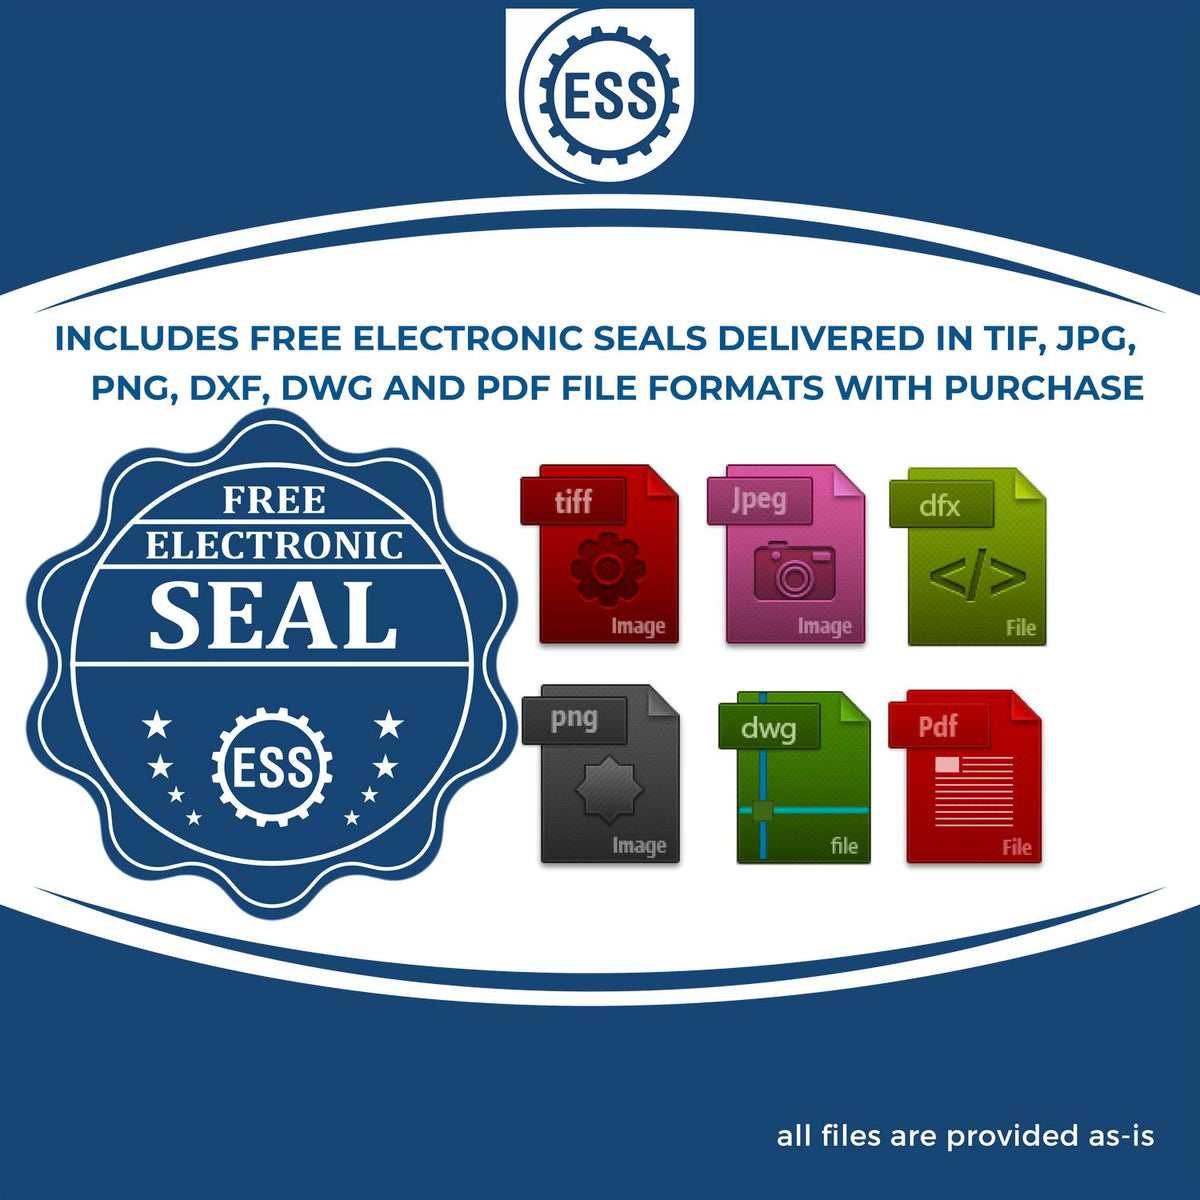 An infographic for the free electronic seal for the Hybrid New Jersey Landscape Architect Seal illustrating the different file type icons such as DXF, DWG, TIF, JPG and PNG.